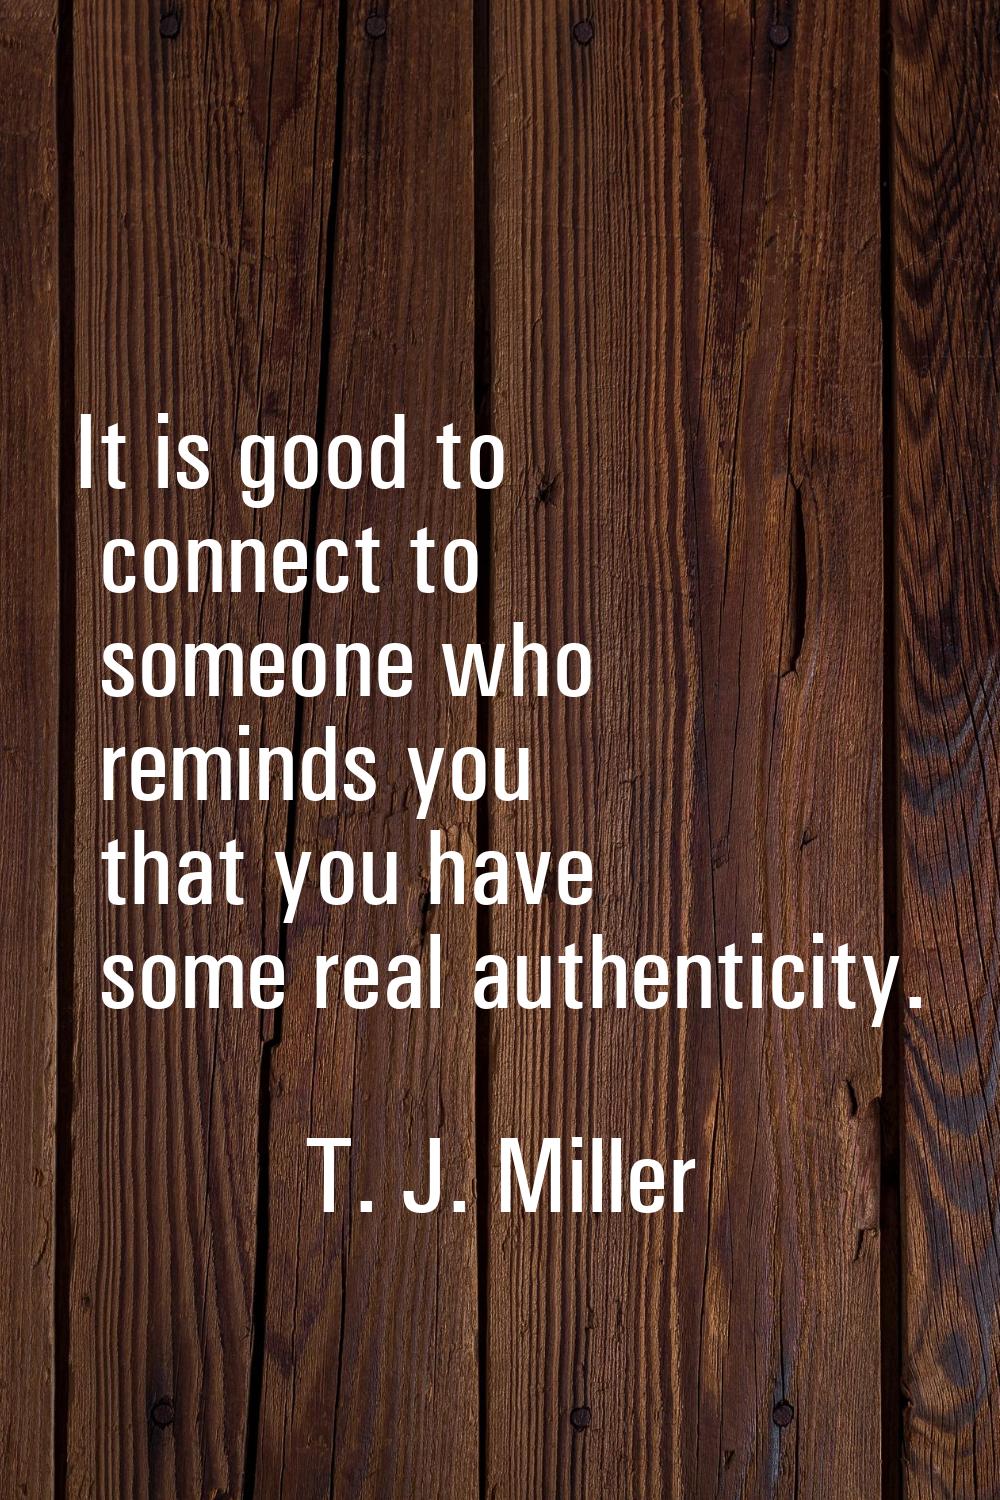 It is good to connect to someone who reminds you that you have some real authenticity.